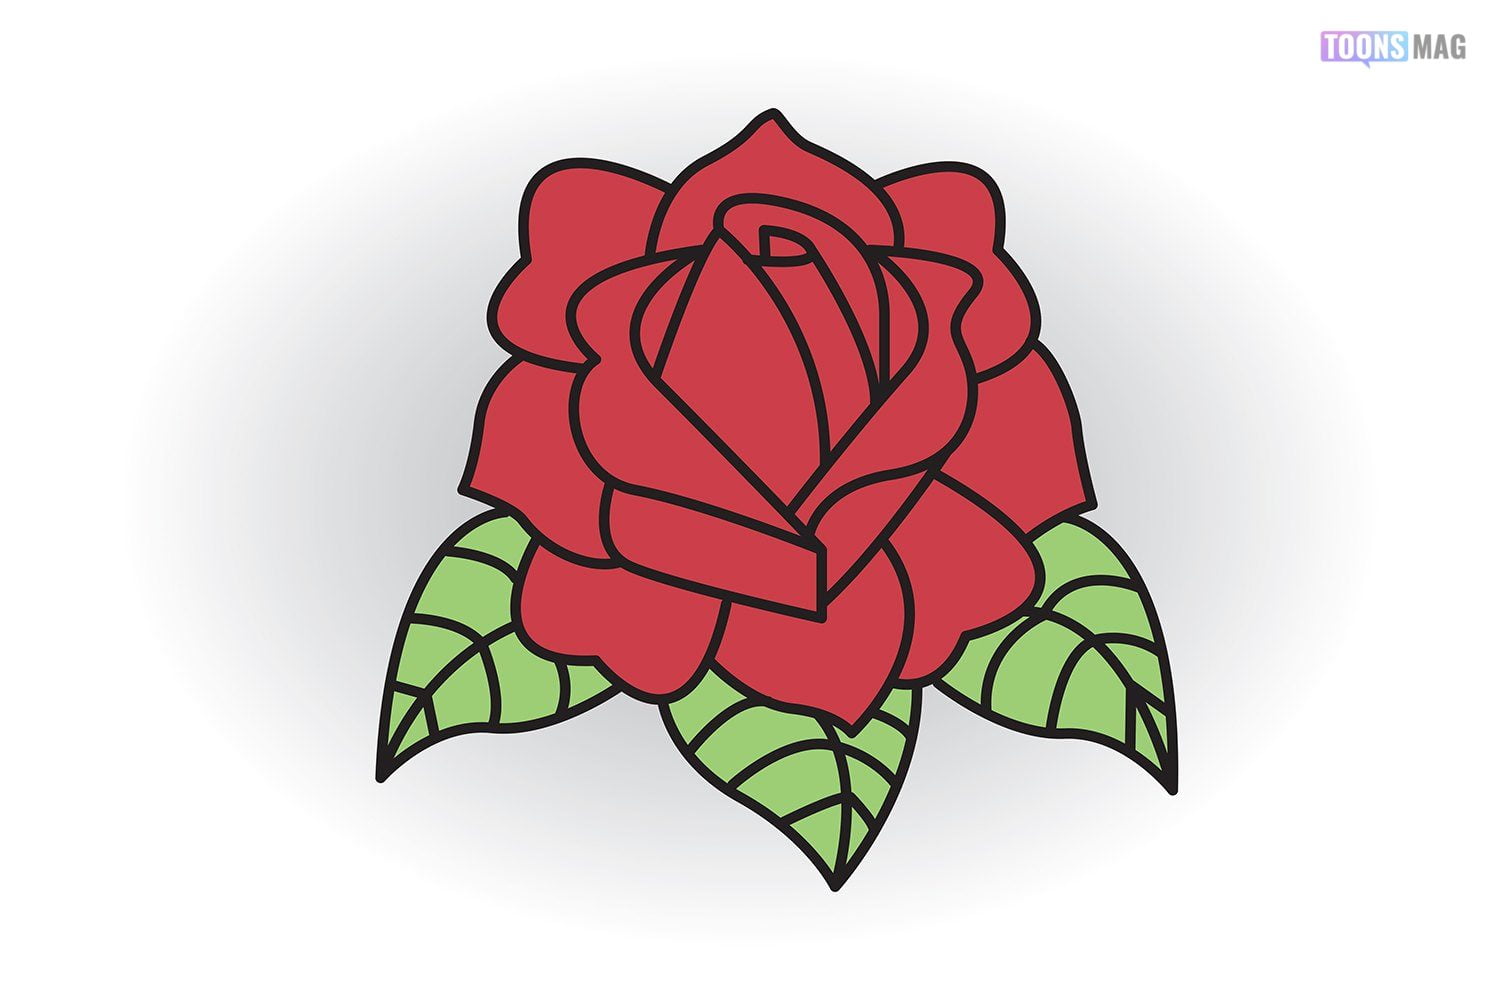 Easy How to Draw a Rose Tutorial Video and Rose Coloring Page